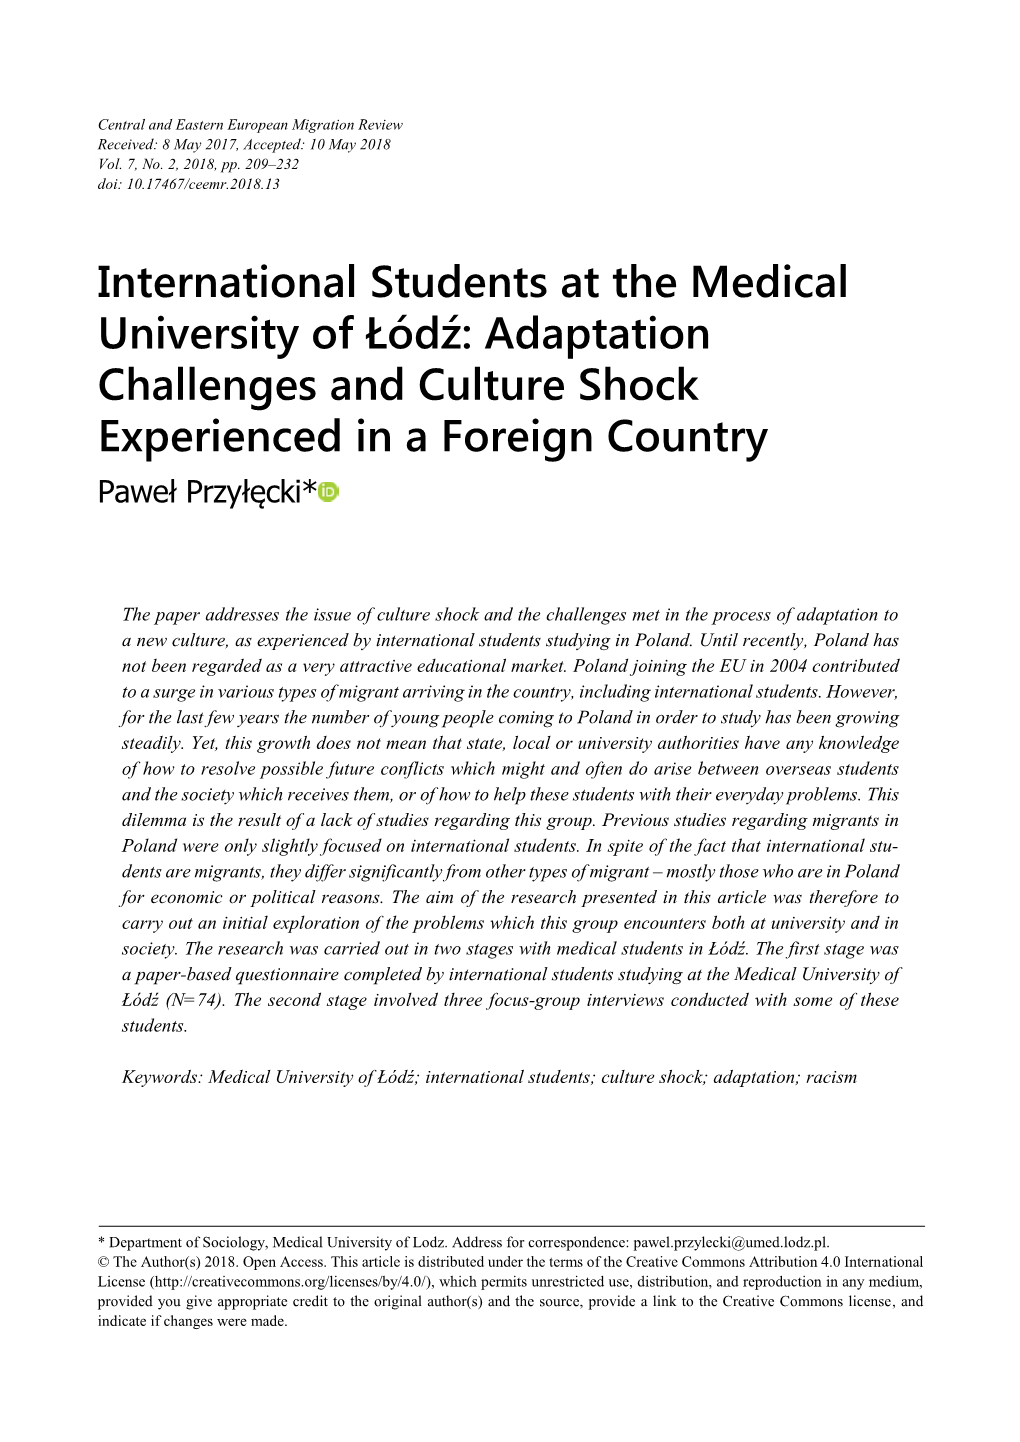 International Students at the Medical University of Łódź: Adaptation Challenges and Culture Shock Experienced in a Foreign Country Paweł Przyłęcki*